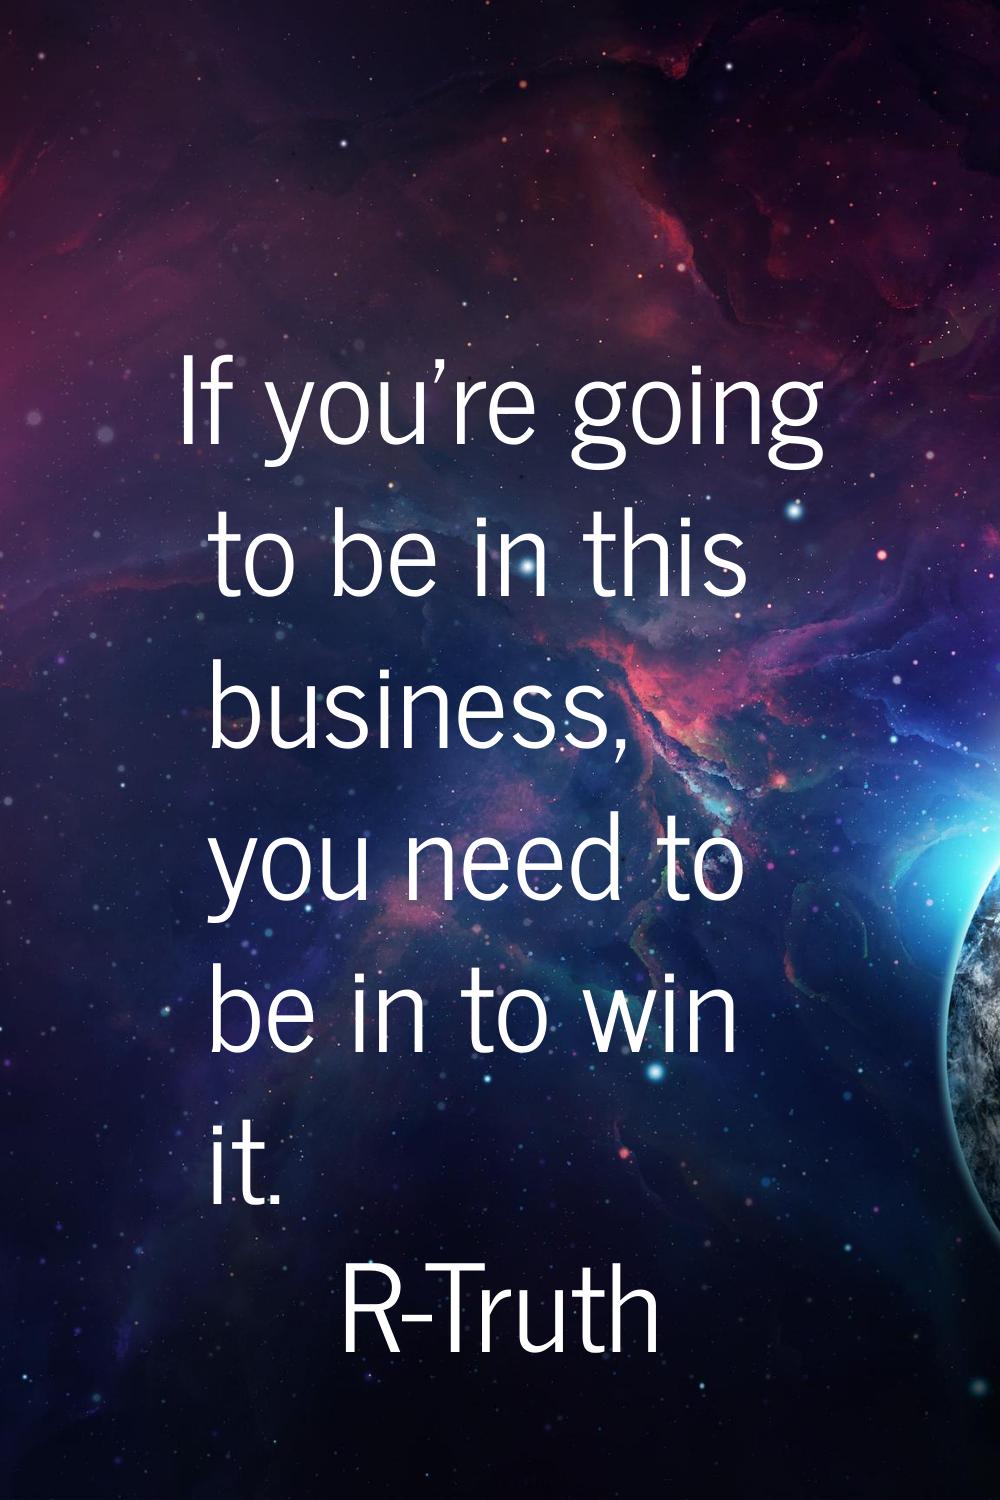 If you're going to be in this business, you need to be in to win it.